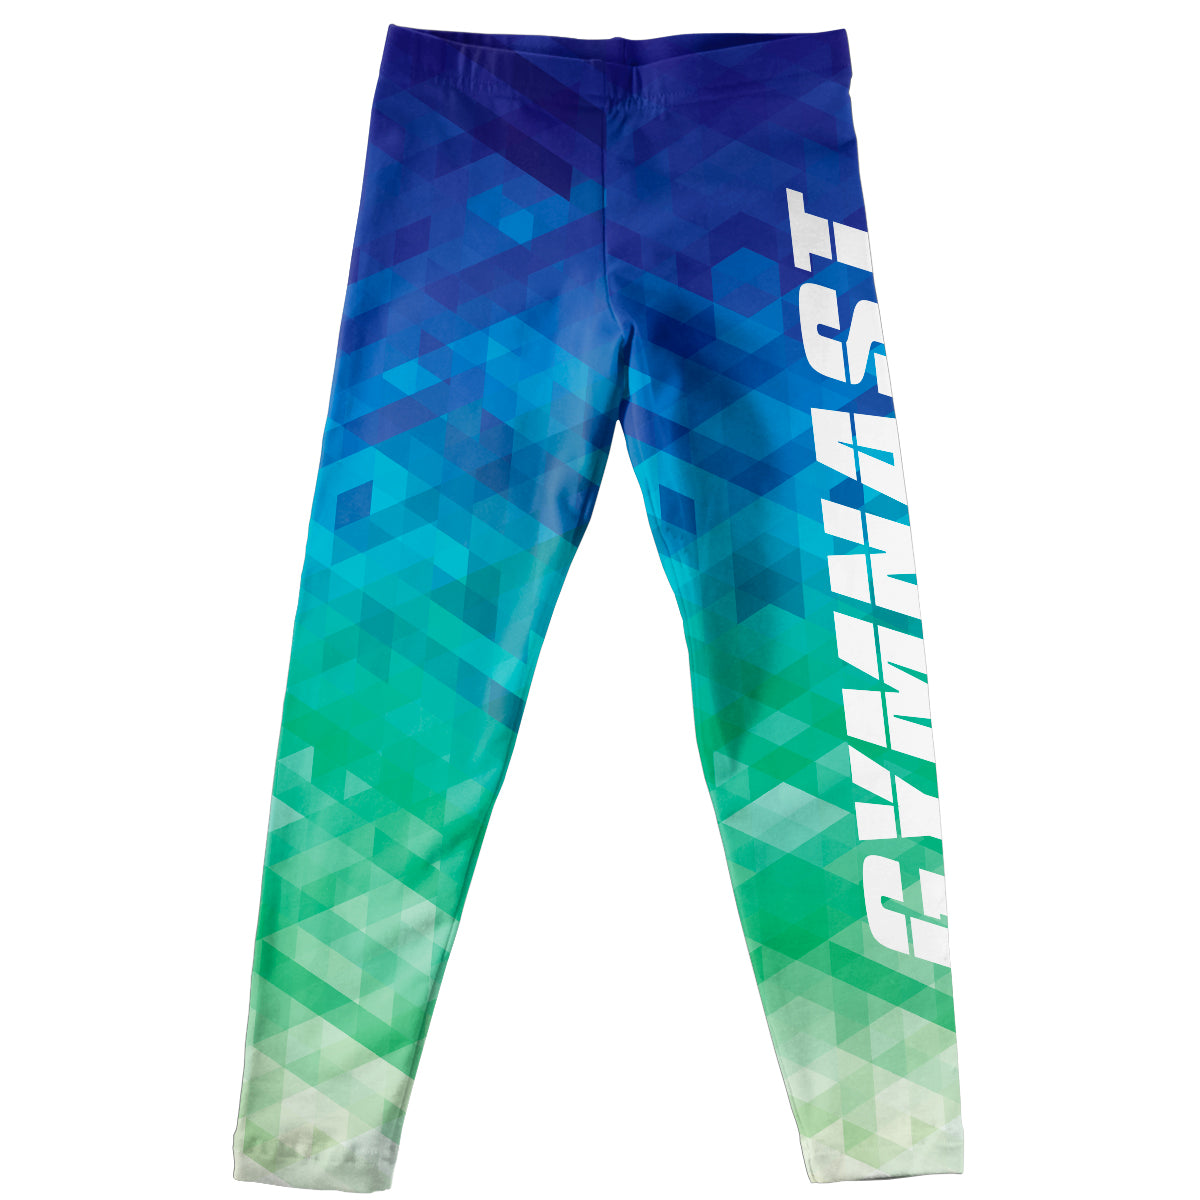 Gymnast Blue and Green Leggings - Wimziy&Co.